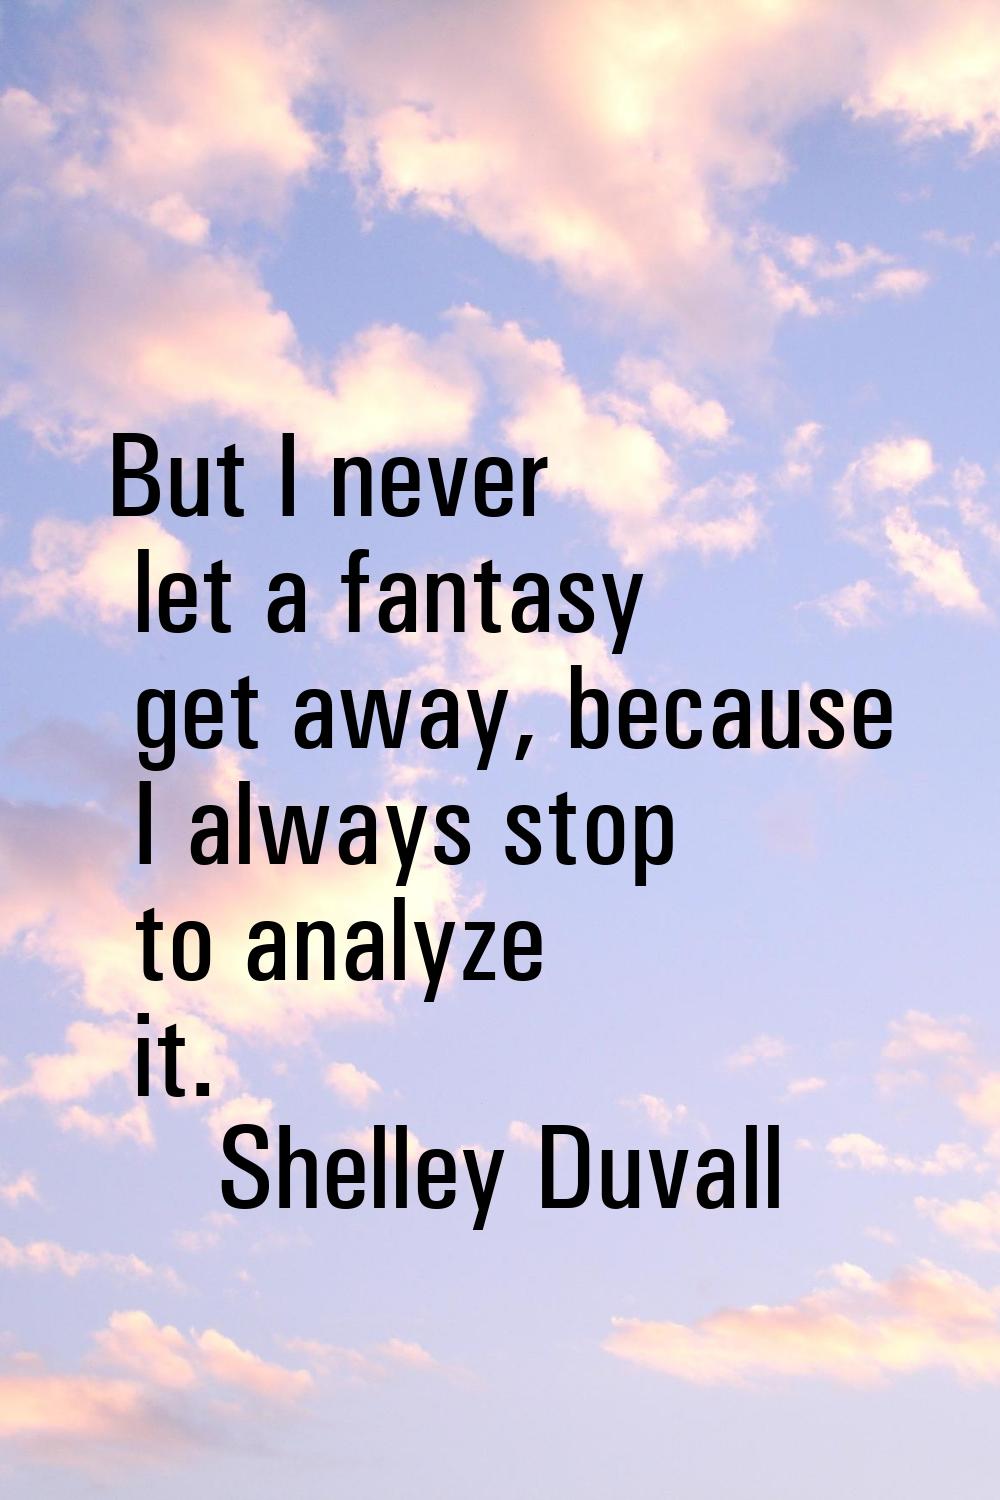 But I never let a fantasy get away, because I always stop to analyze it.